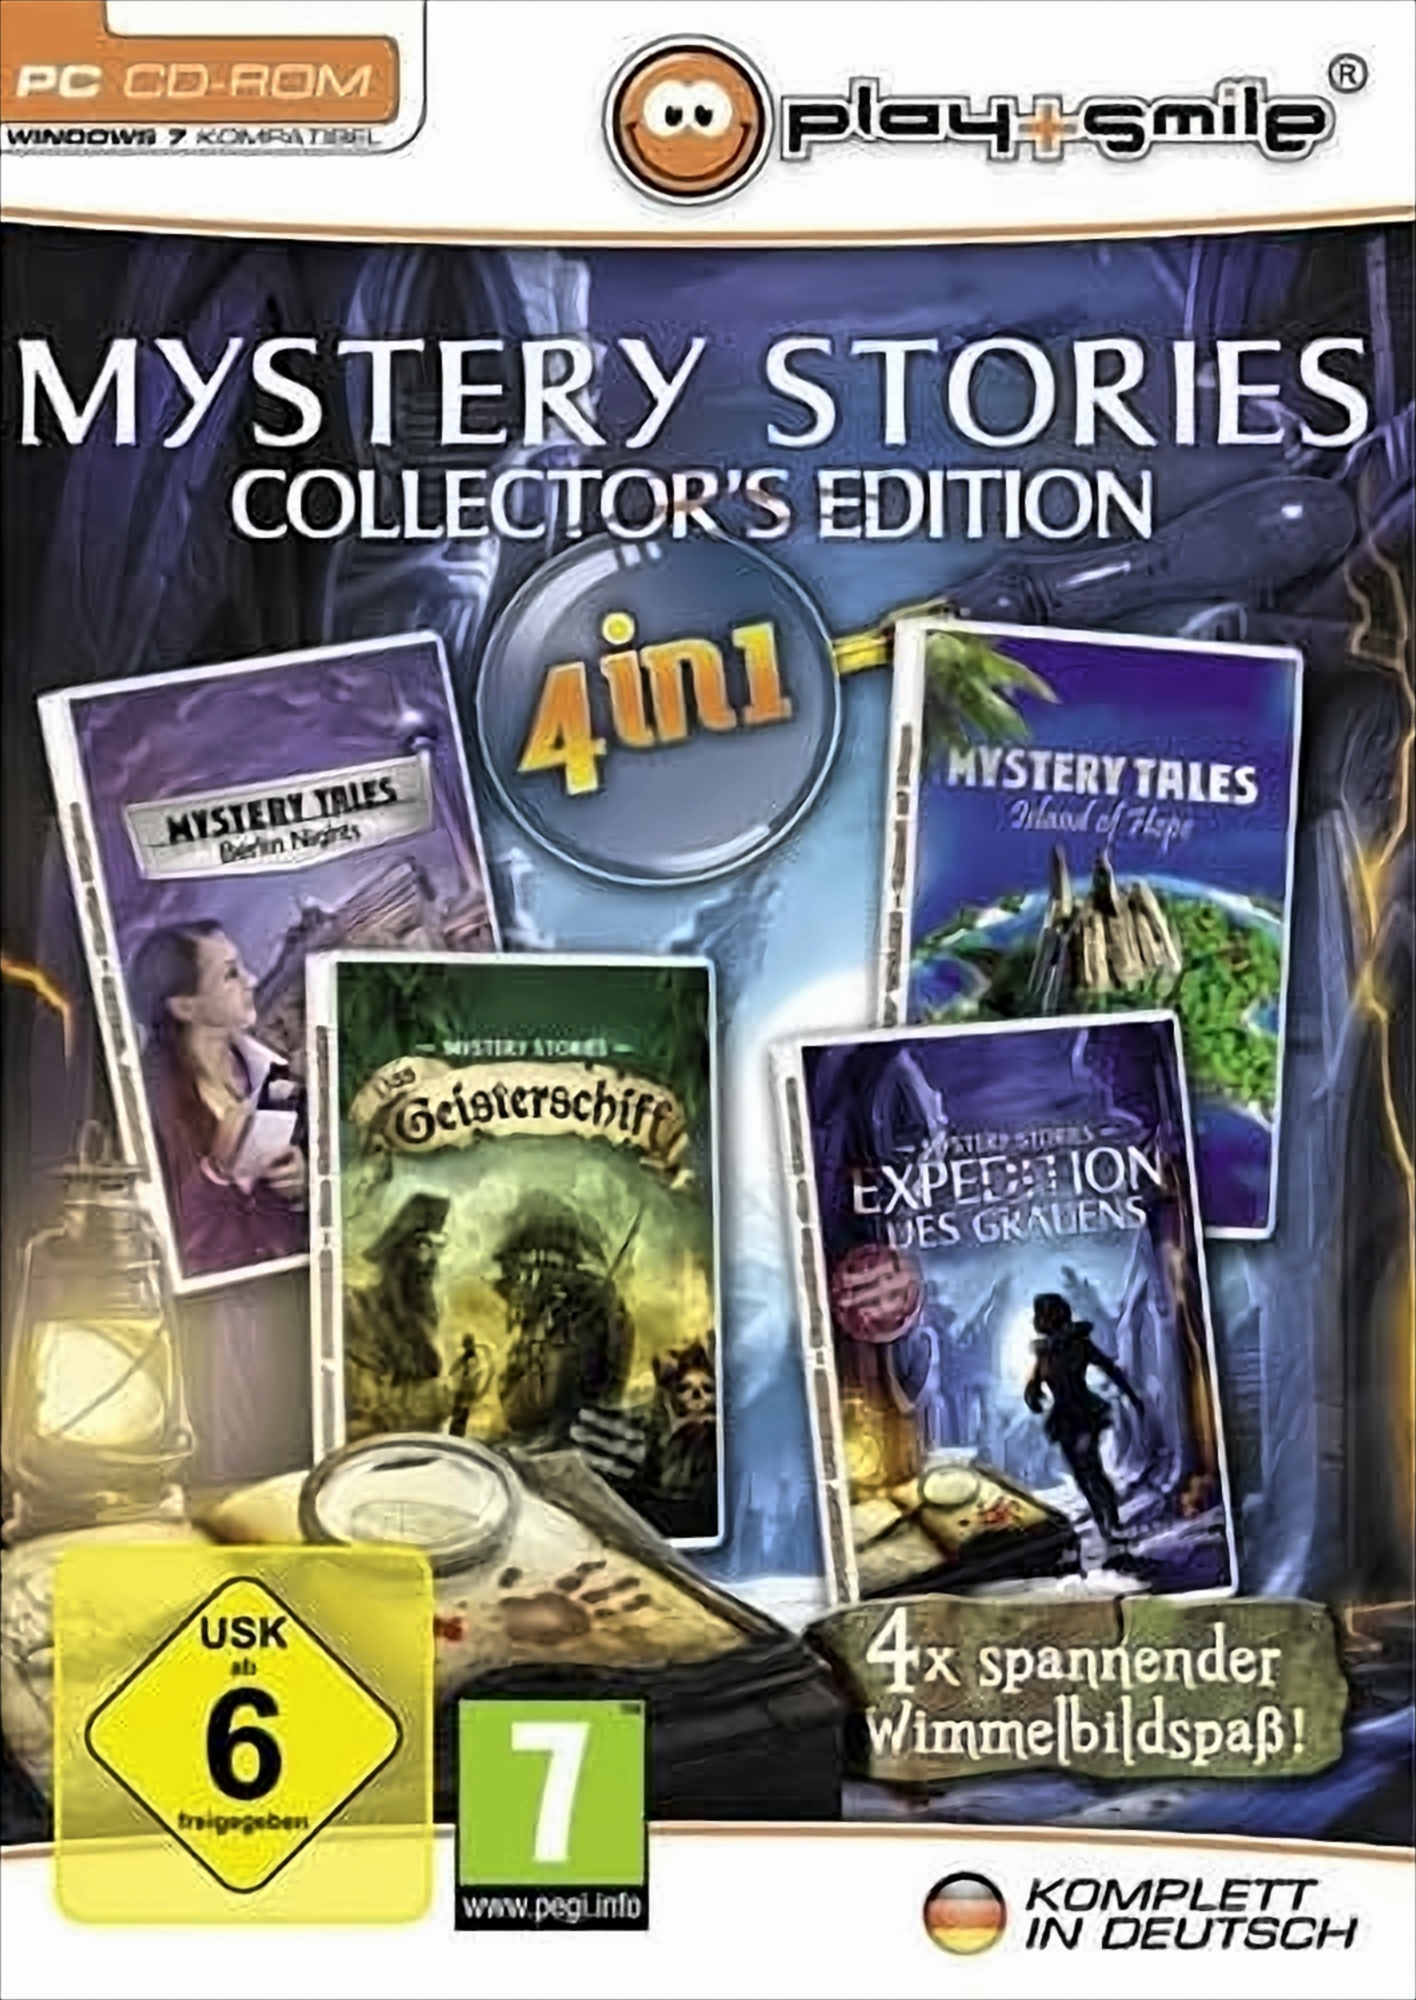 Mystery Stories: Collector's Edition 4in1 von Rondomedia